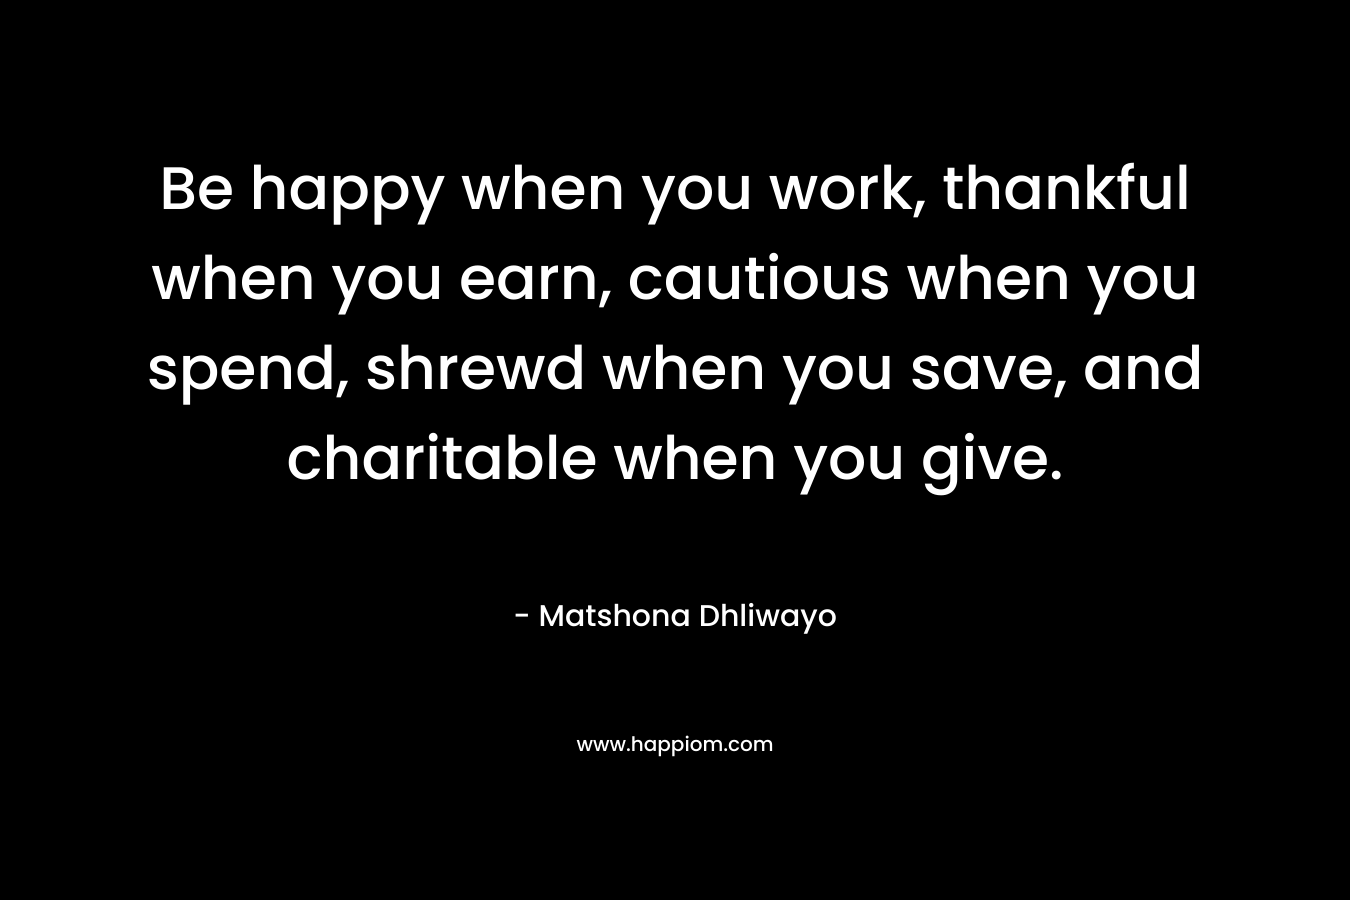 Be happy when you work, thankful when you earn, cautious when you spend, shrewd when you save, and charitable when you give.